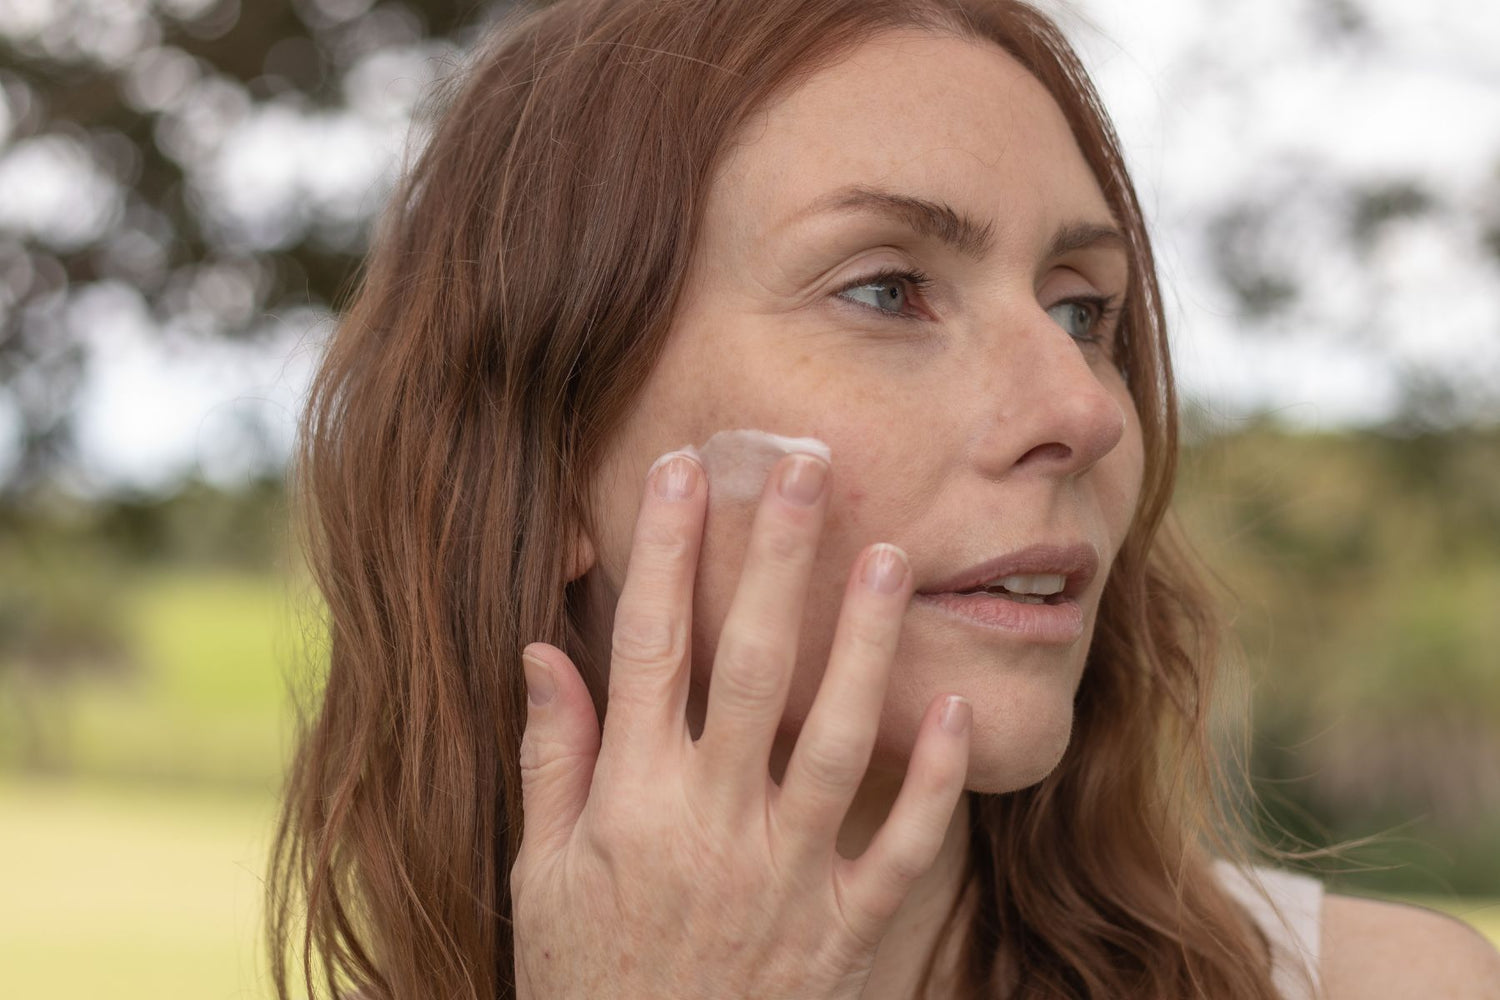 A woman in the midst of nature, tenderly applying a hydrating cream onto her face, surrounded by lush greenery and serene natural beauty, embracing the nourishing benefits of skincare while immersing herself in the tranquility of the outdoors